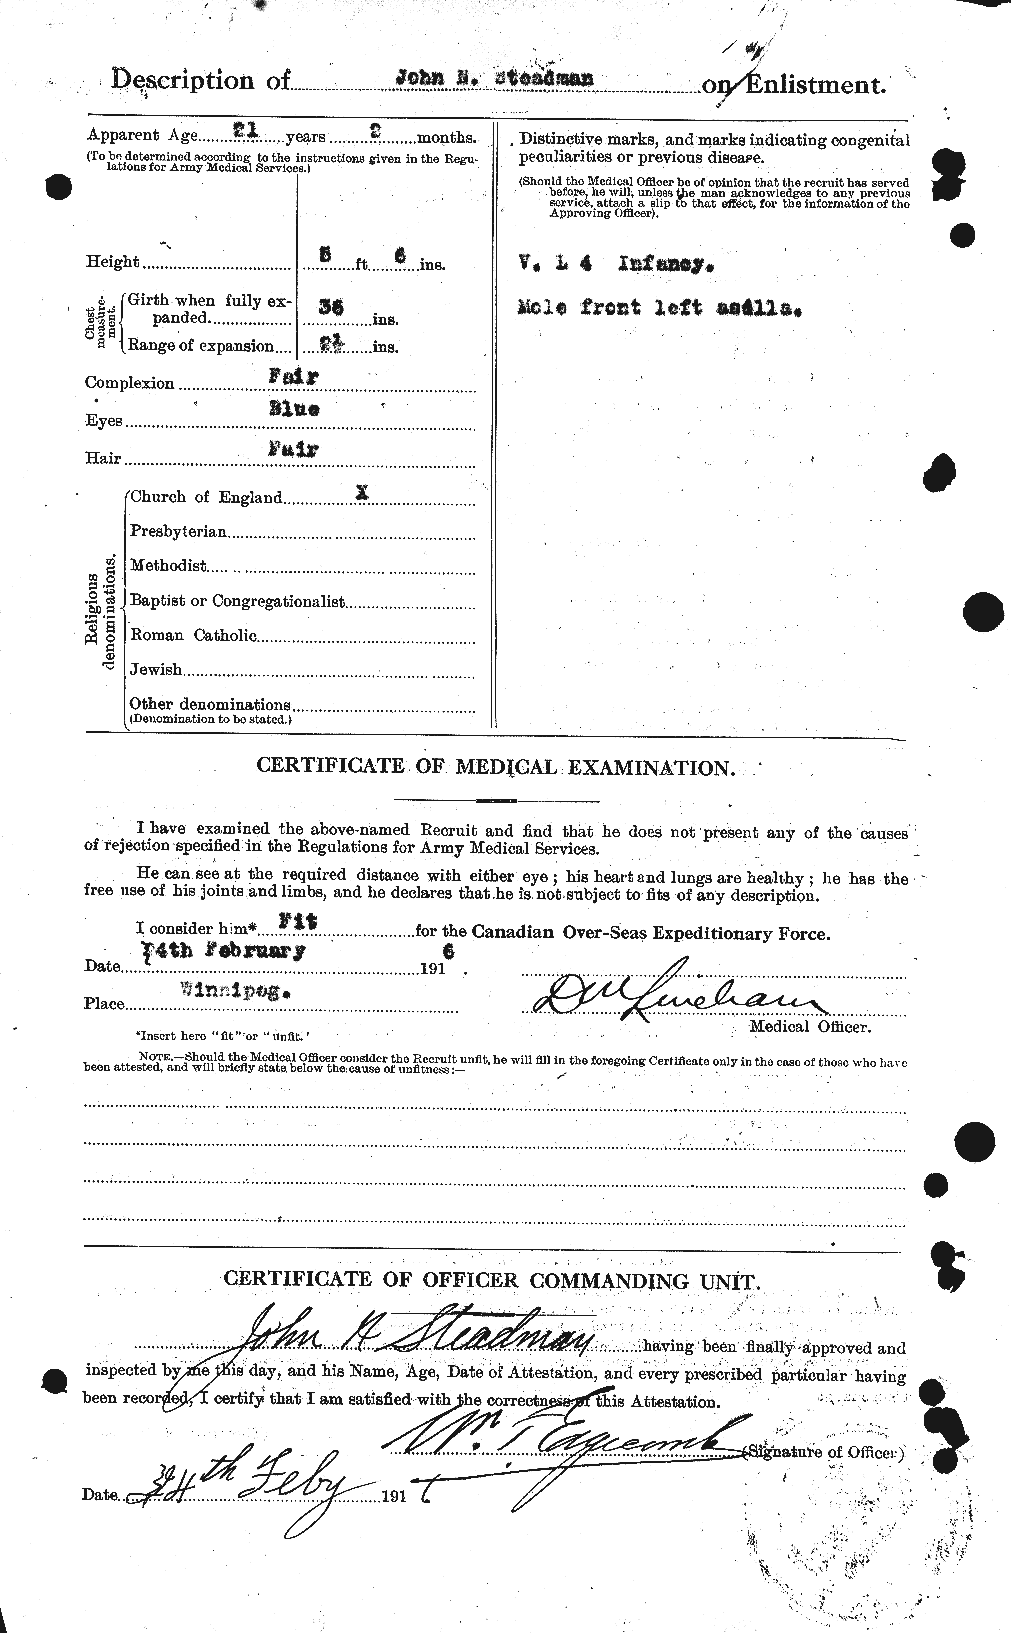 Personnel Records of the First World War - CEF 115498b